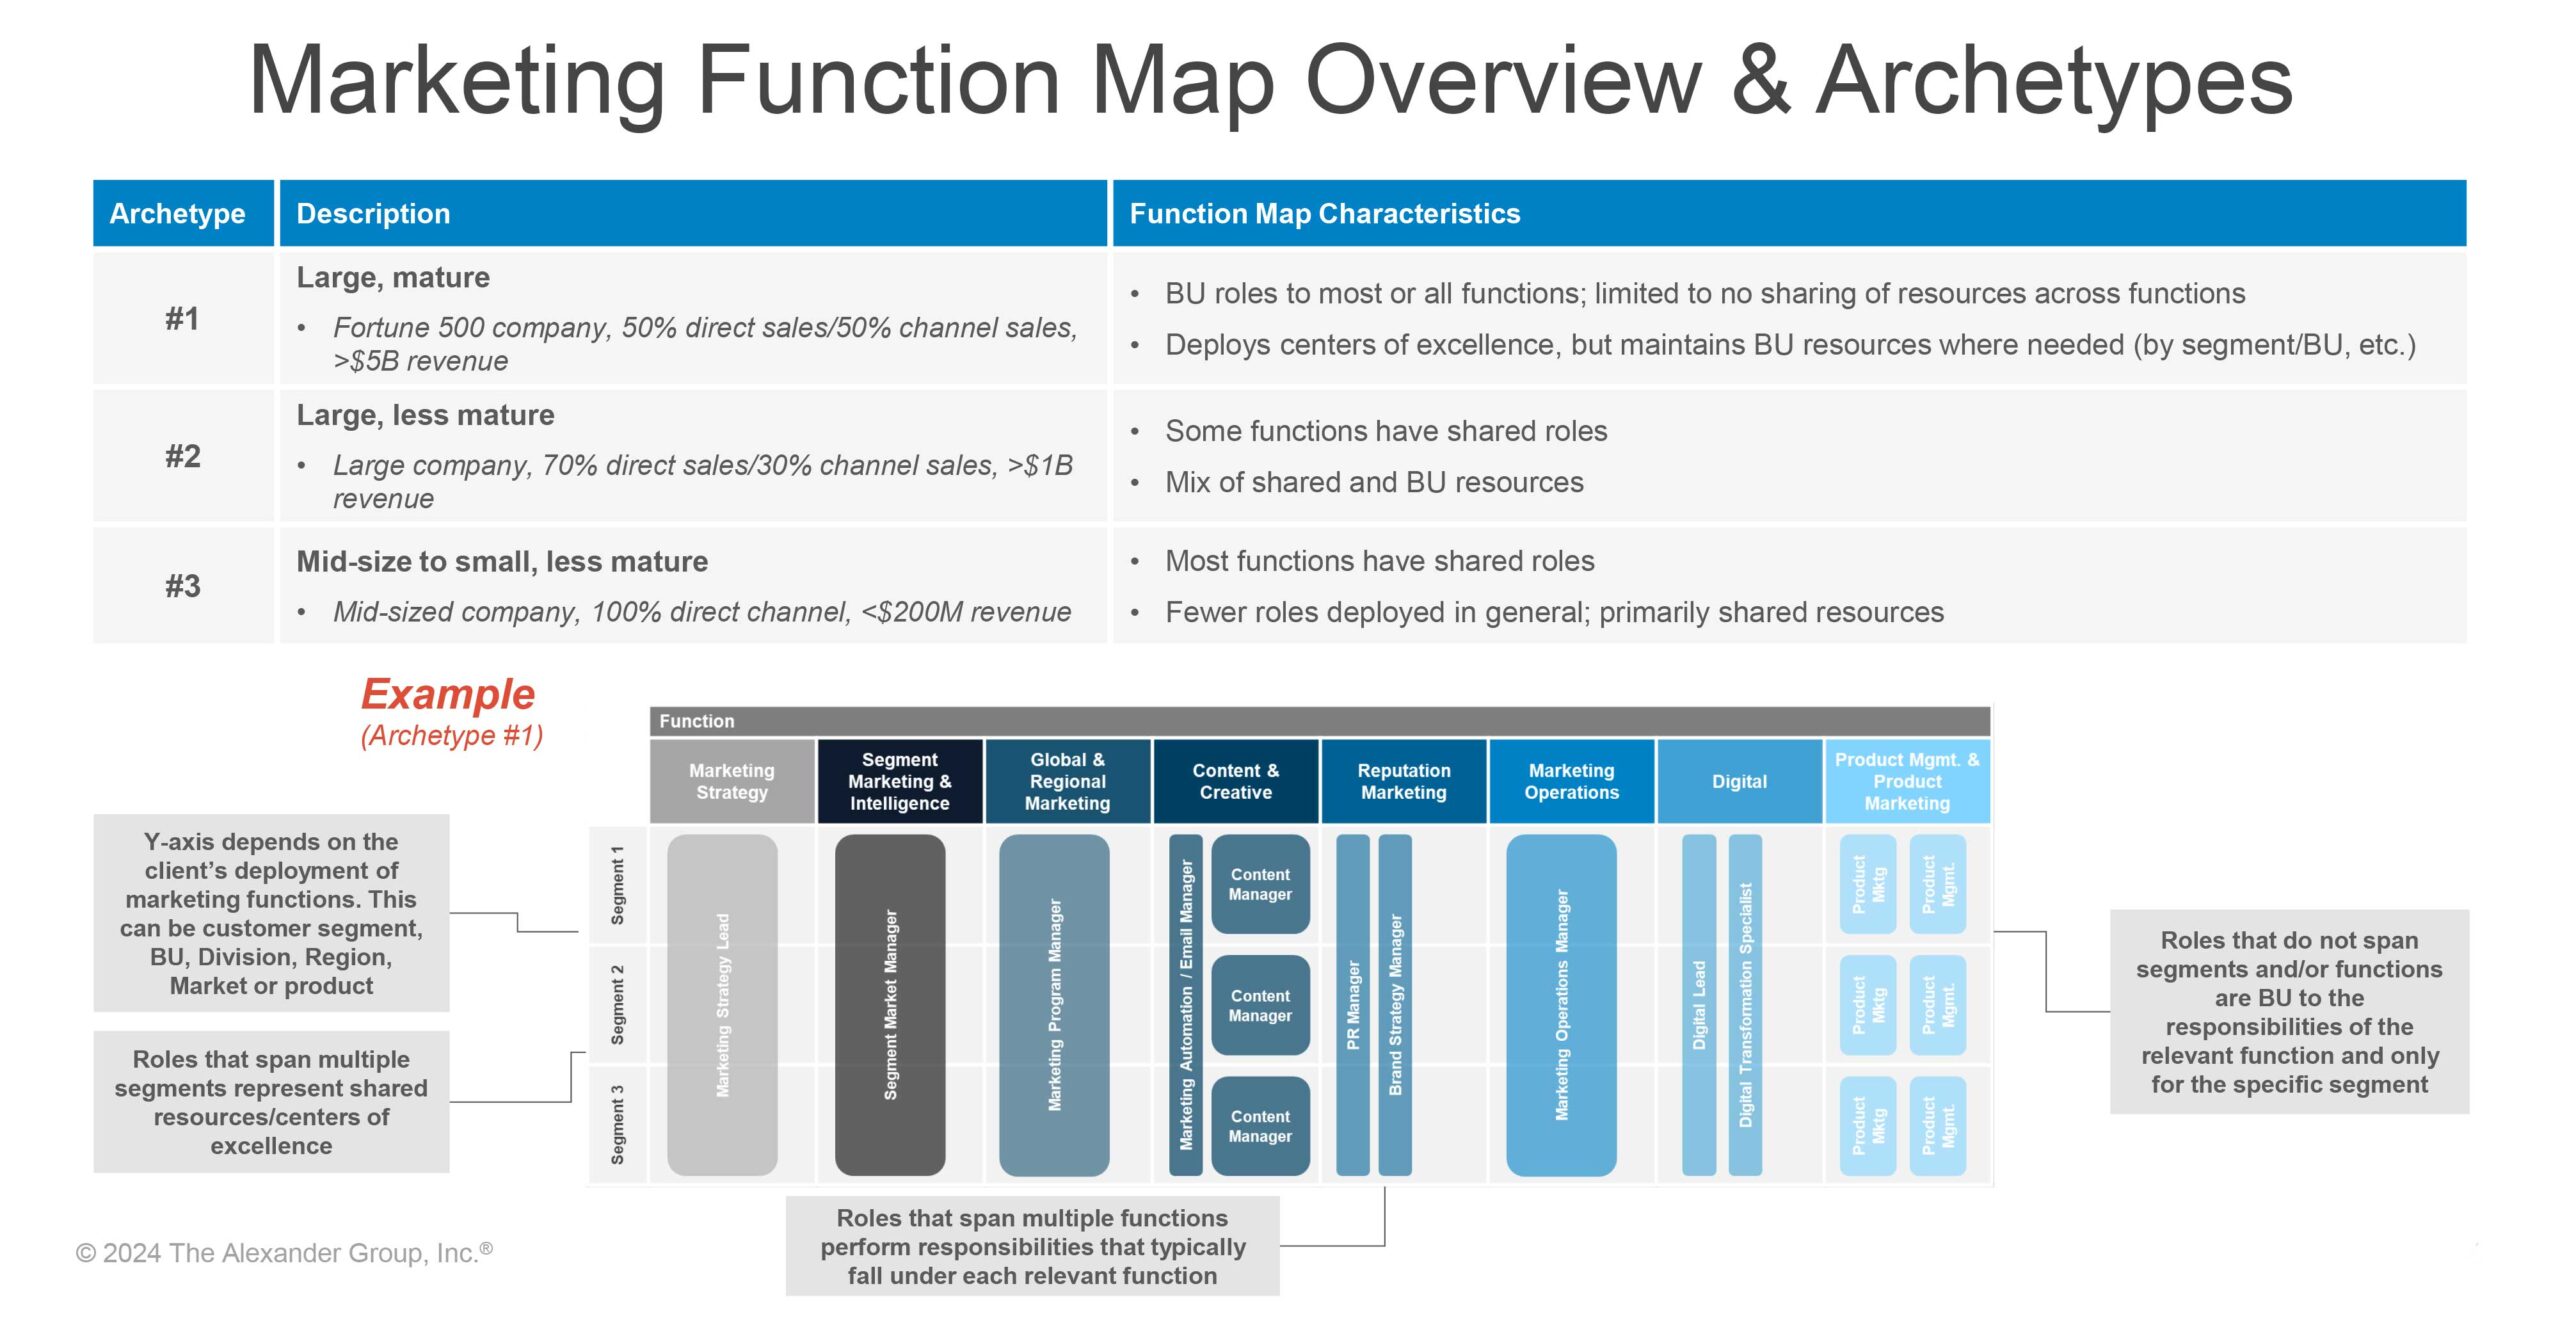 Marketing Function Map Overview & Archetypes - Alexander Group, Inc.